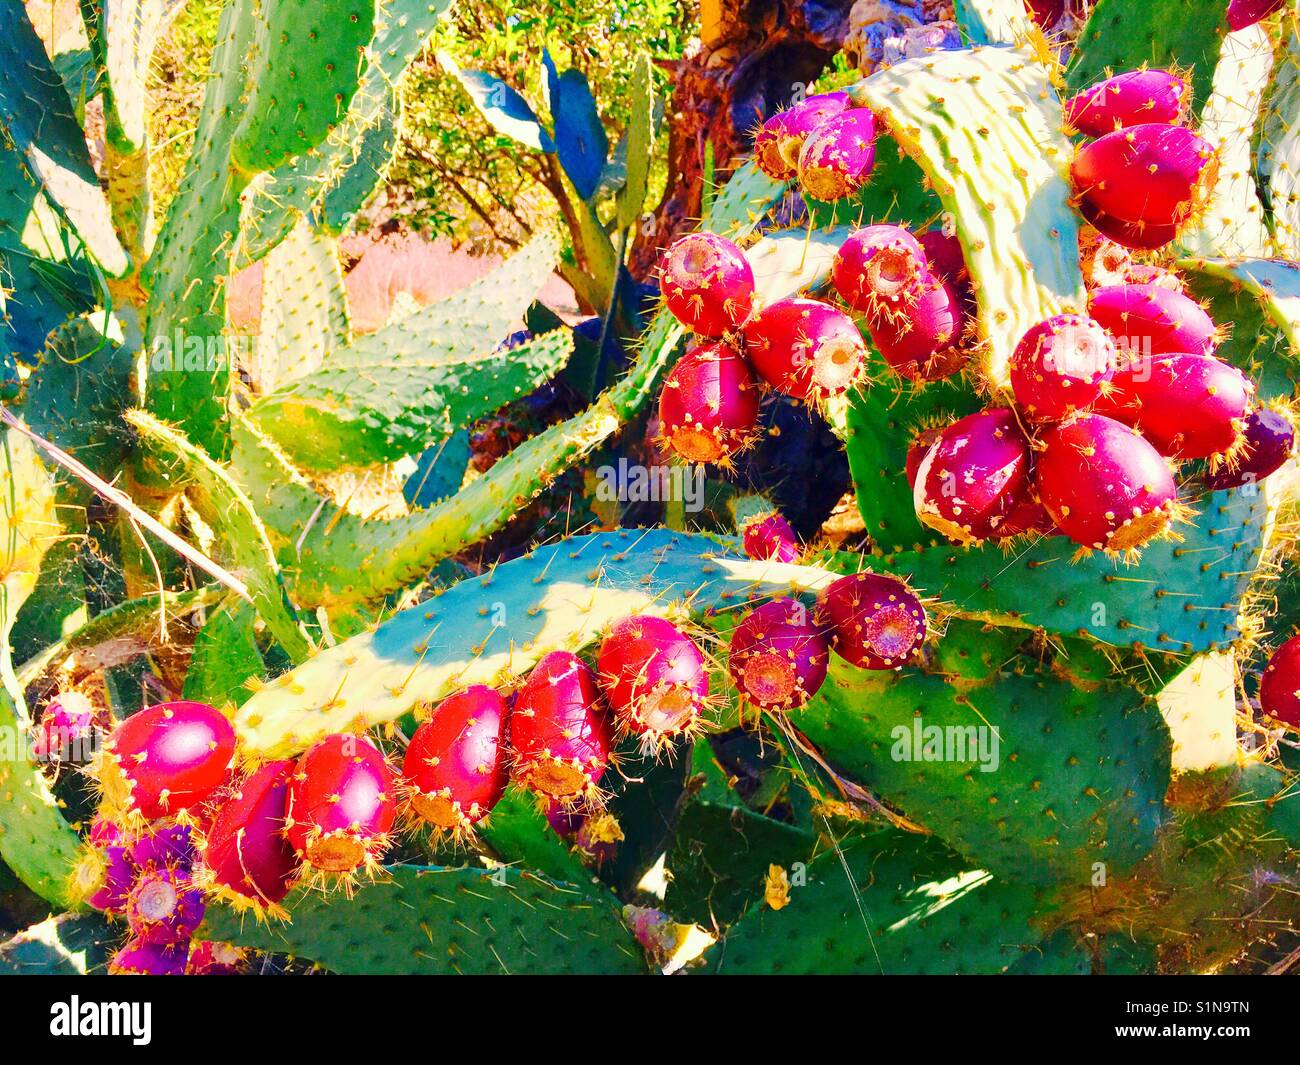 Prickly pears on cactus Stock Photo